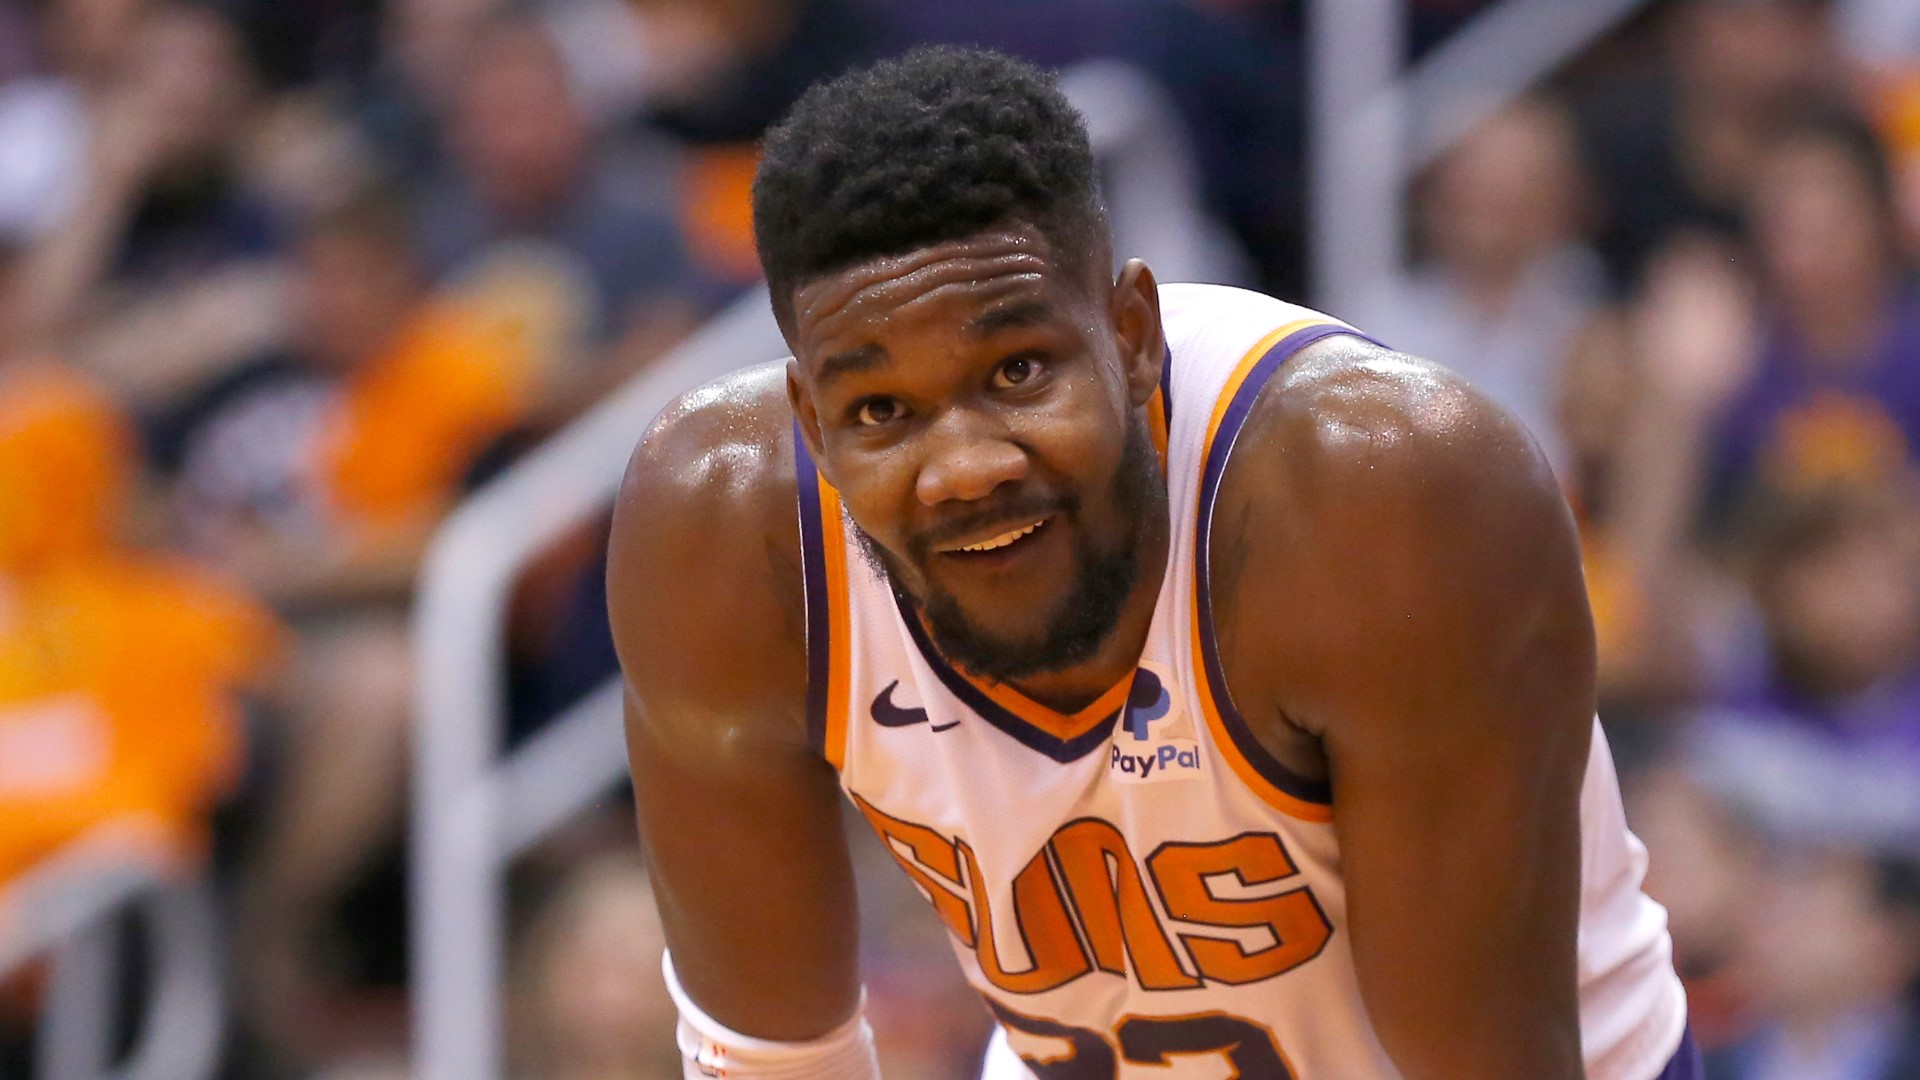 Suns center Deandre Ayton has been suspended for 25 games after he reportedly tested positive for a diuretic. MORE: http://bit.ly/366oJK8